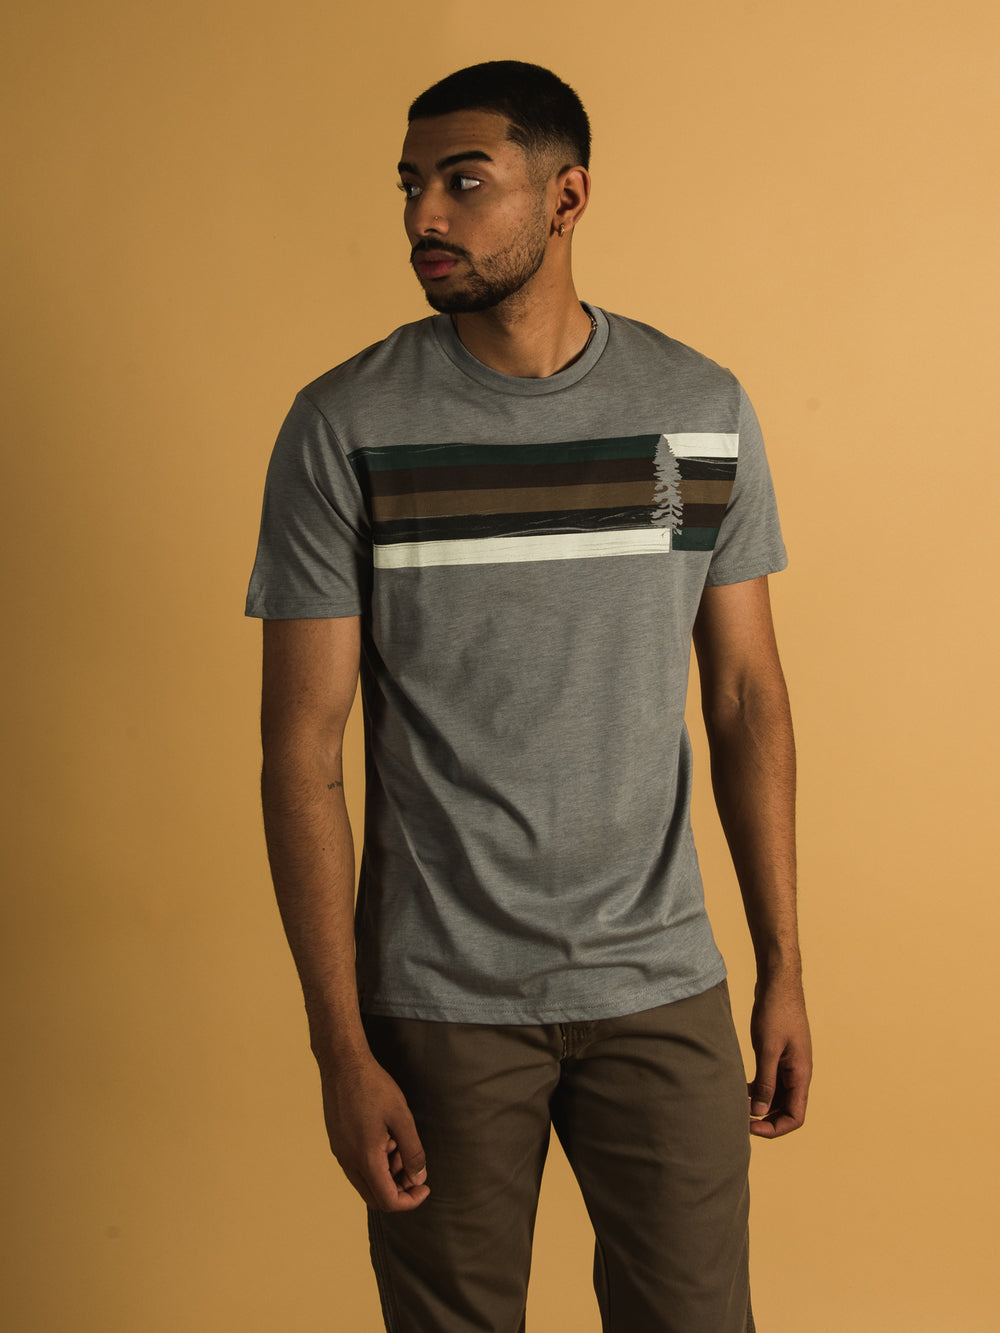  TSHIRT À RAYURES SPRUCE POUR HOMME